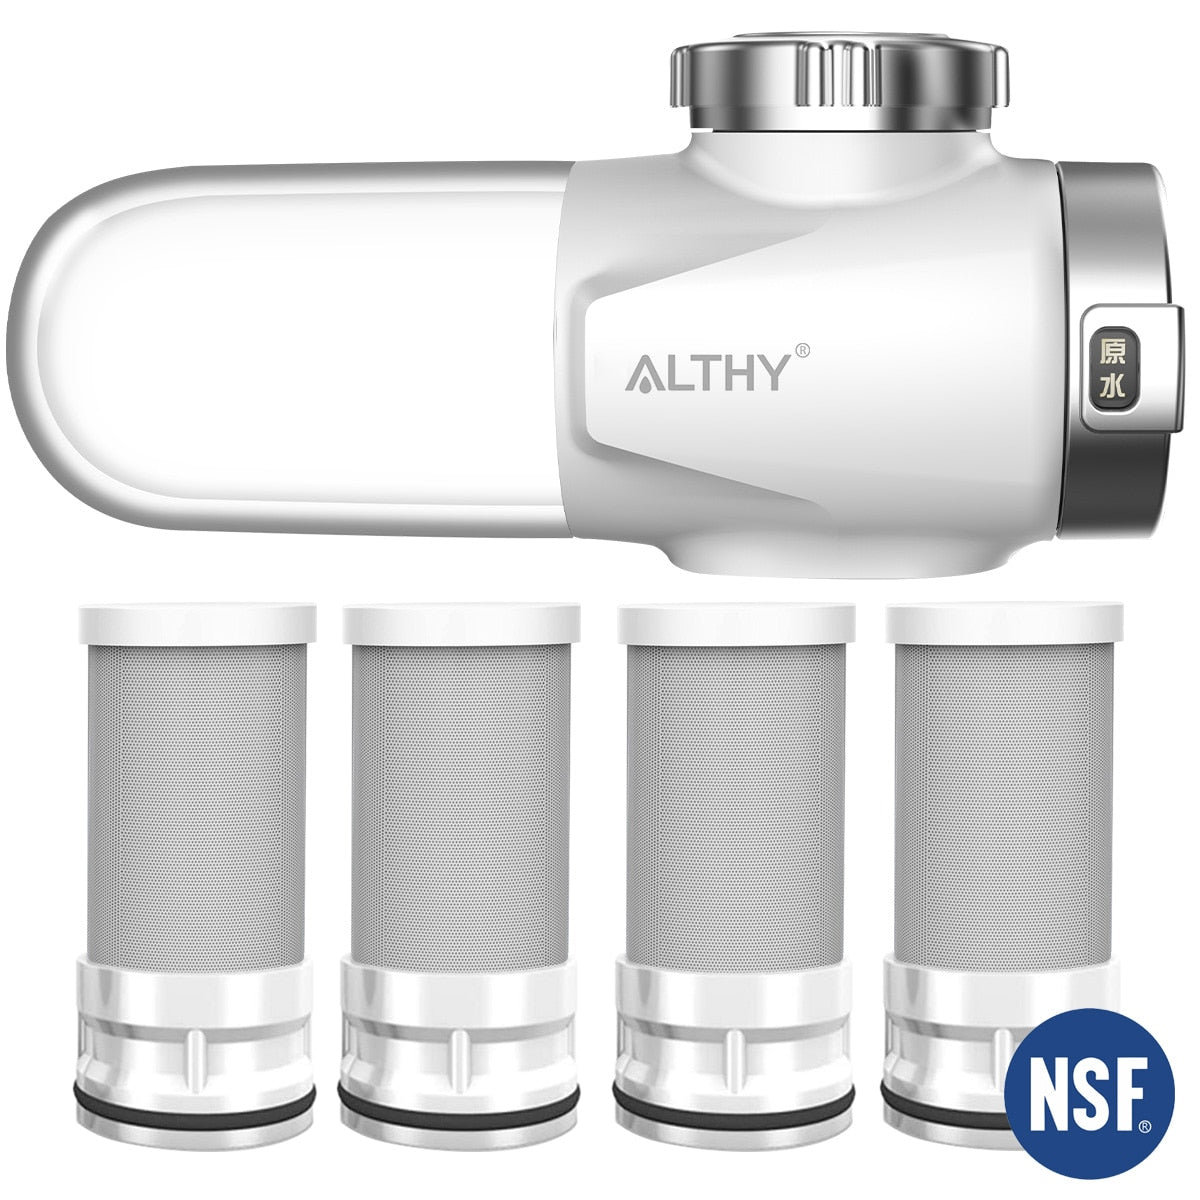 ALTHY ACF System Faucet Water Filter, Tap Water Purifier, Reduces Lead, Chlorine & Bad Taste NSF Certified 320-Gallon Kitchen